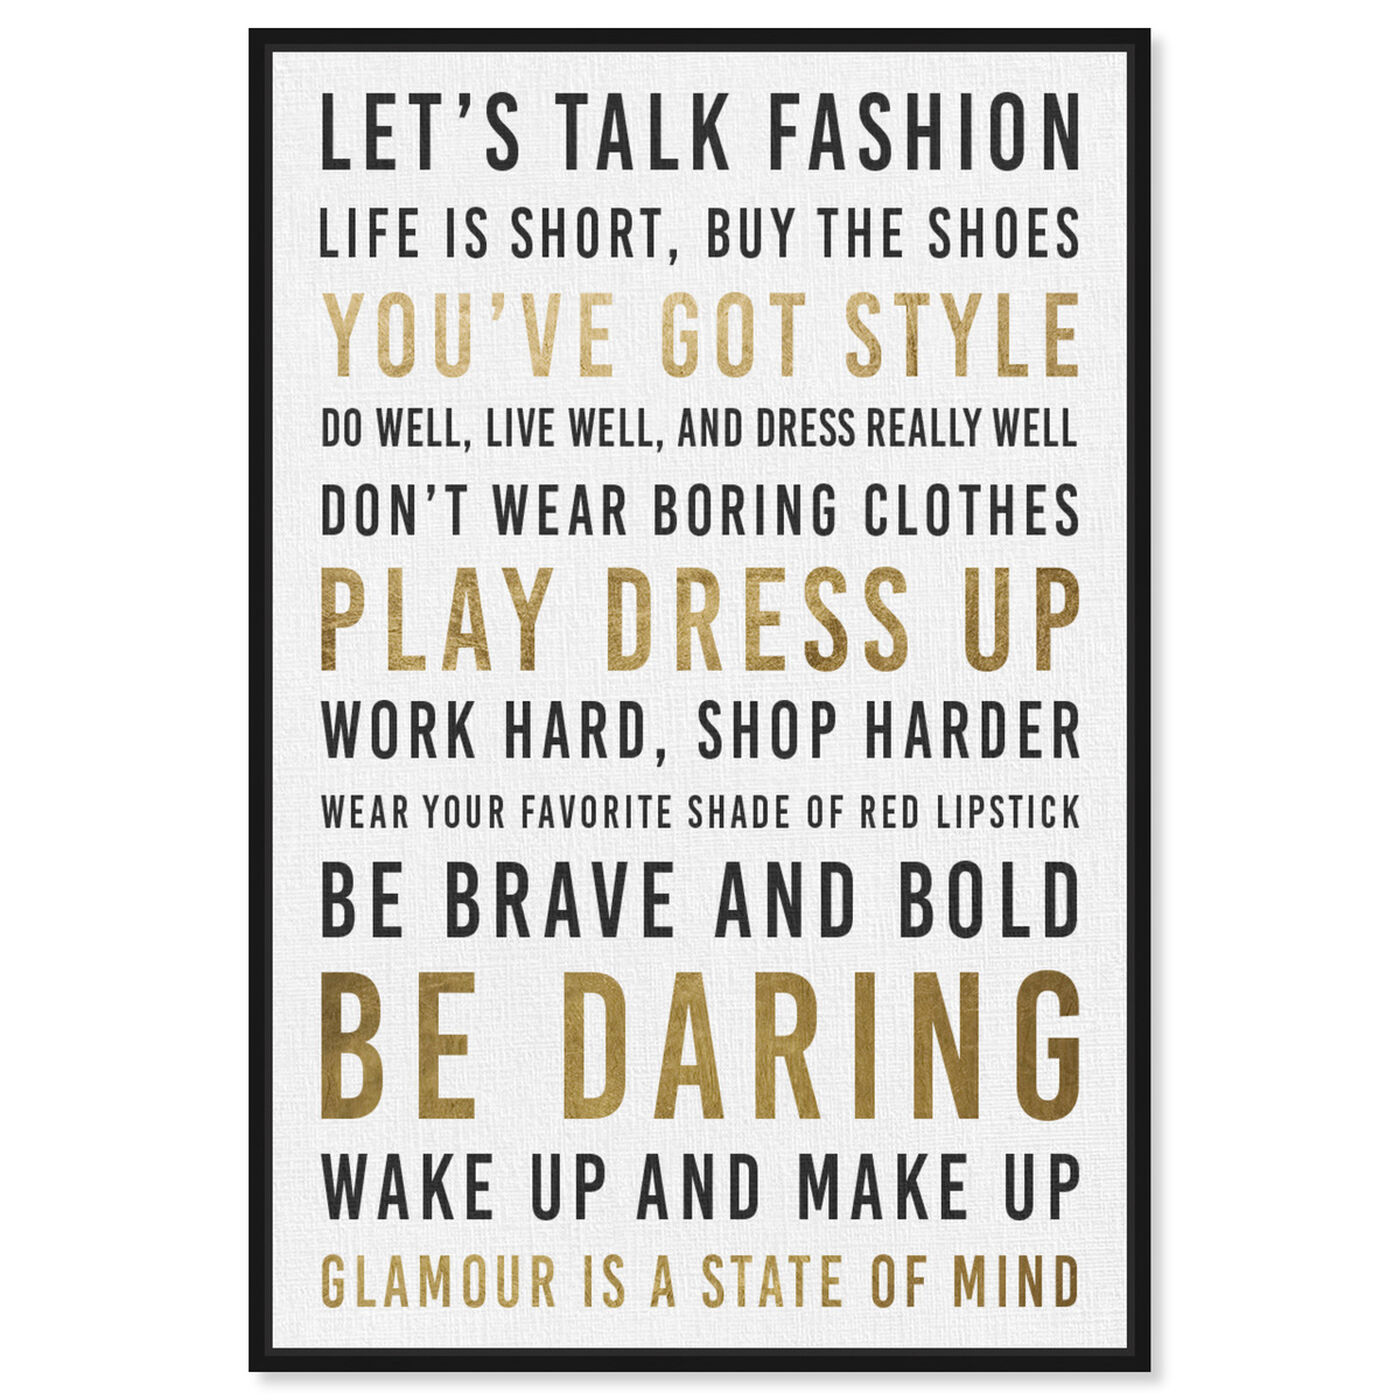 quotes about fashion and life